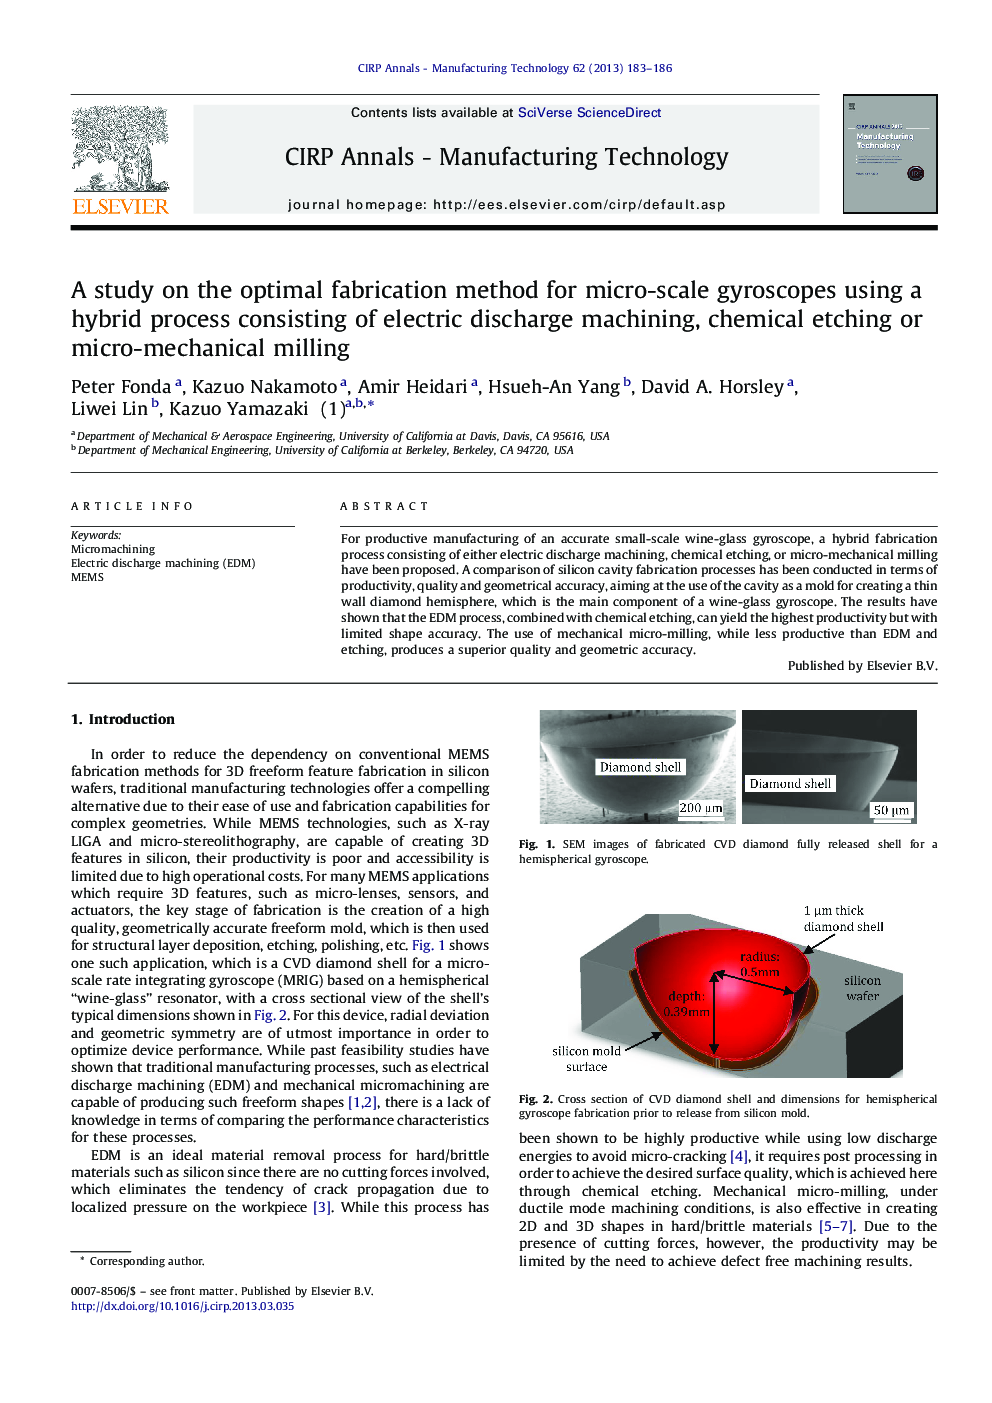 A study on the optimal fabrication method for micro-scale gyroscopes using a hybrid process consisting of electric discharge machining, chemical etching or micro-mechanical milling